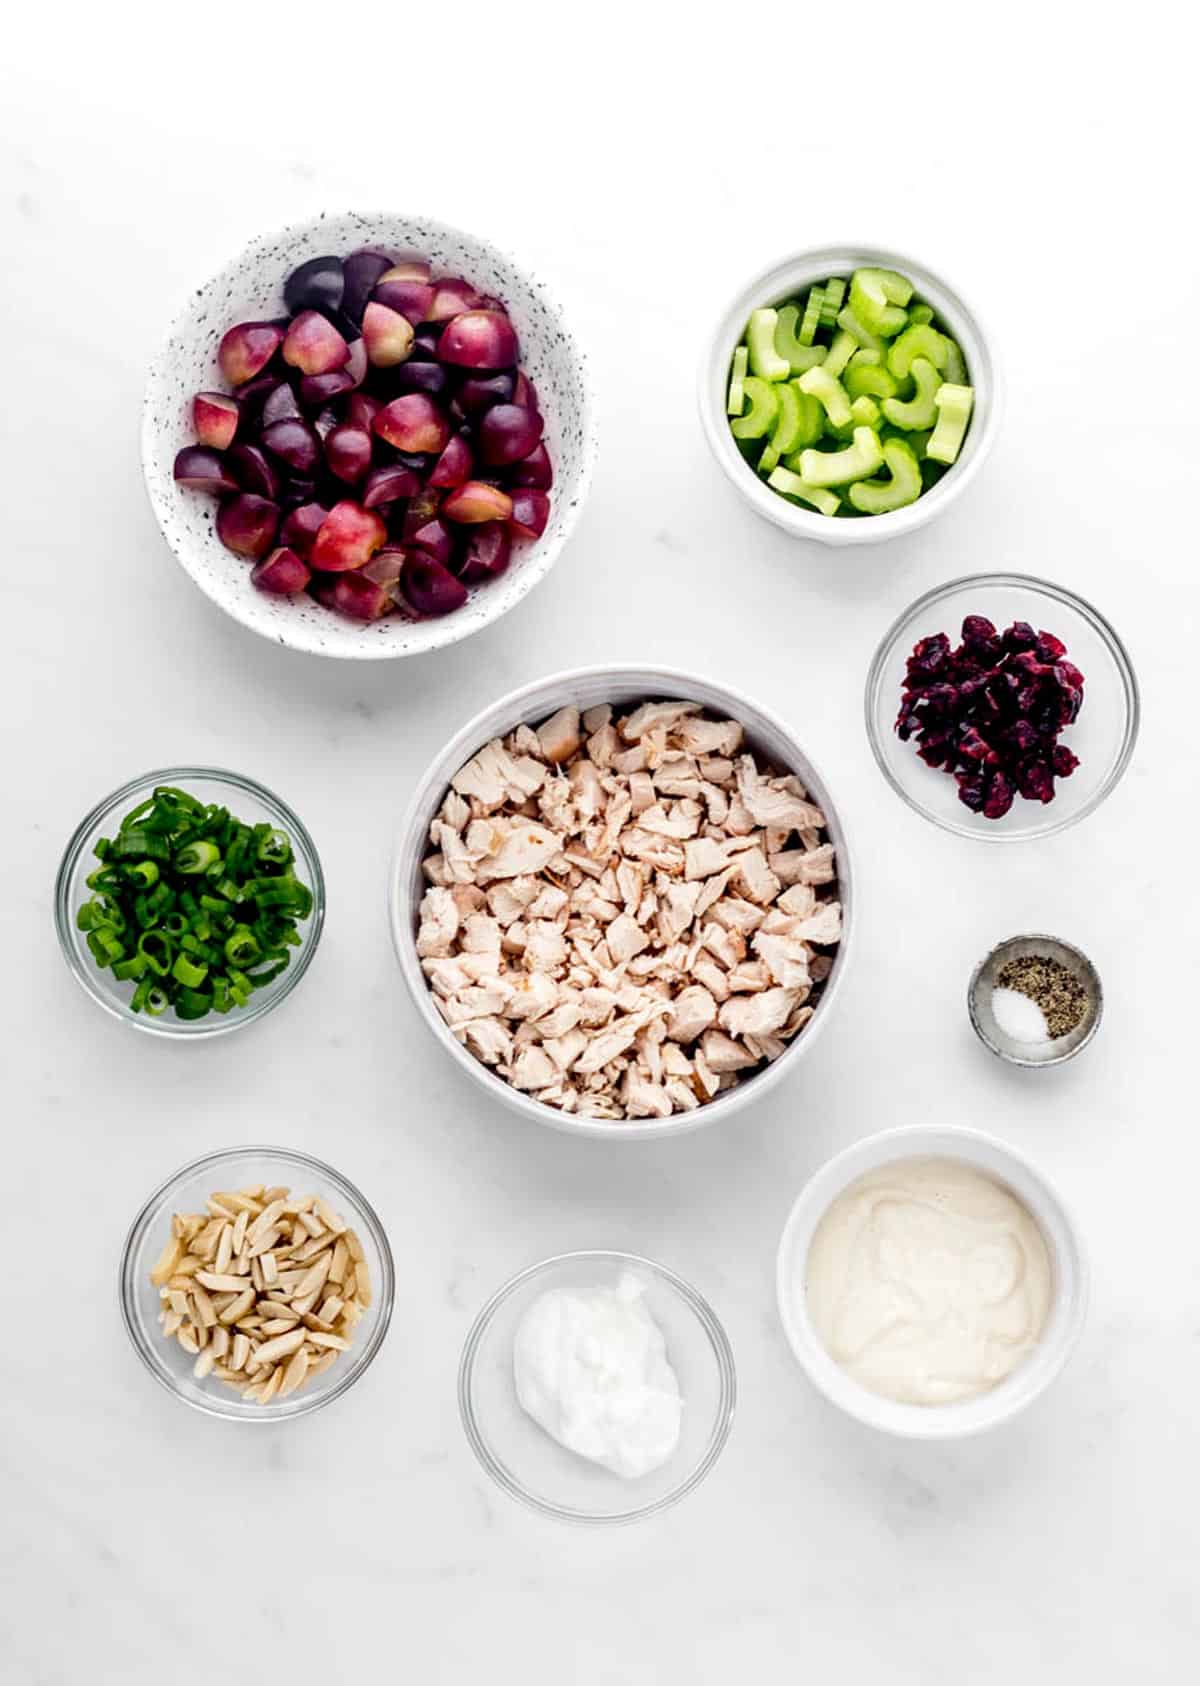 Ingredients to make chicken salad with grapes and almonds recipe.